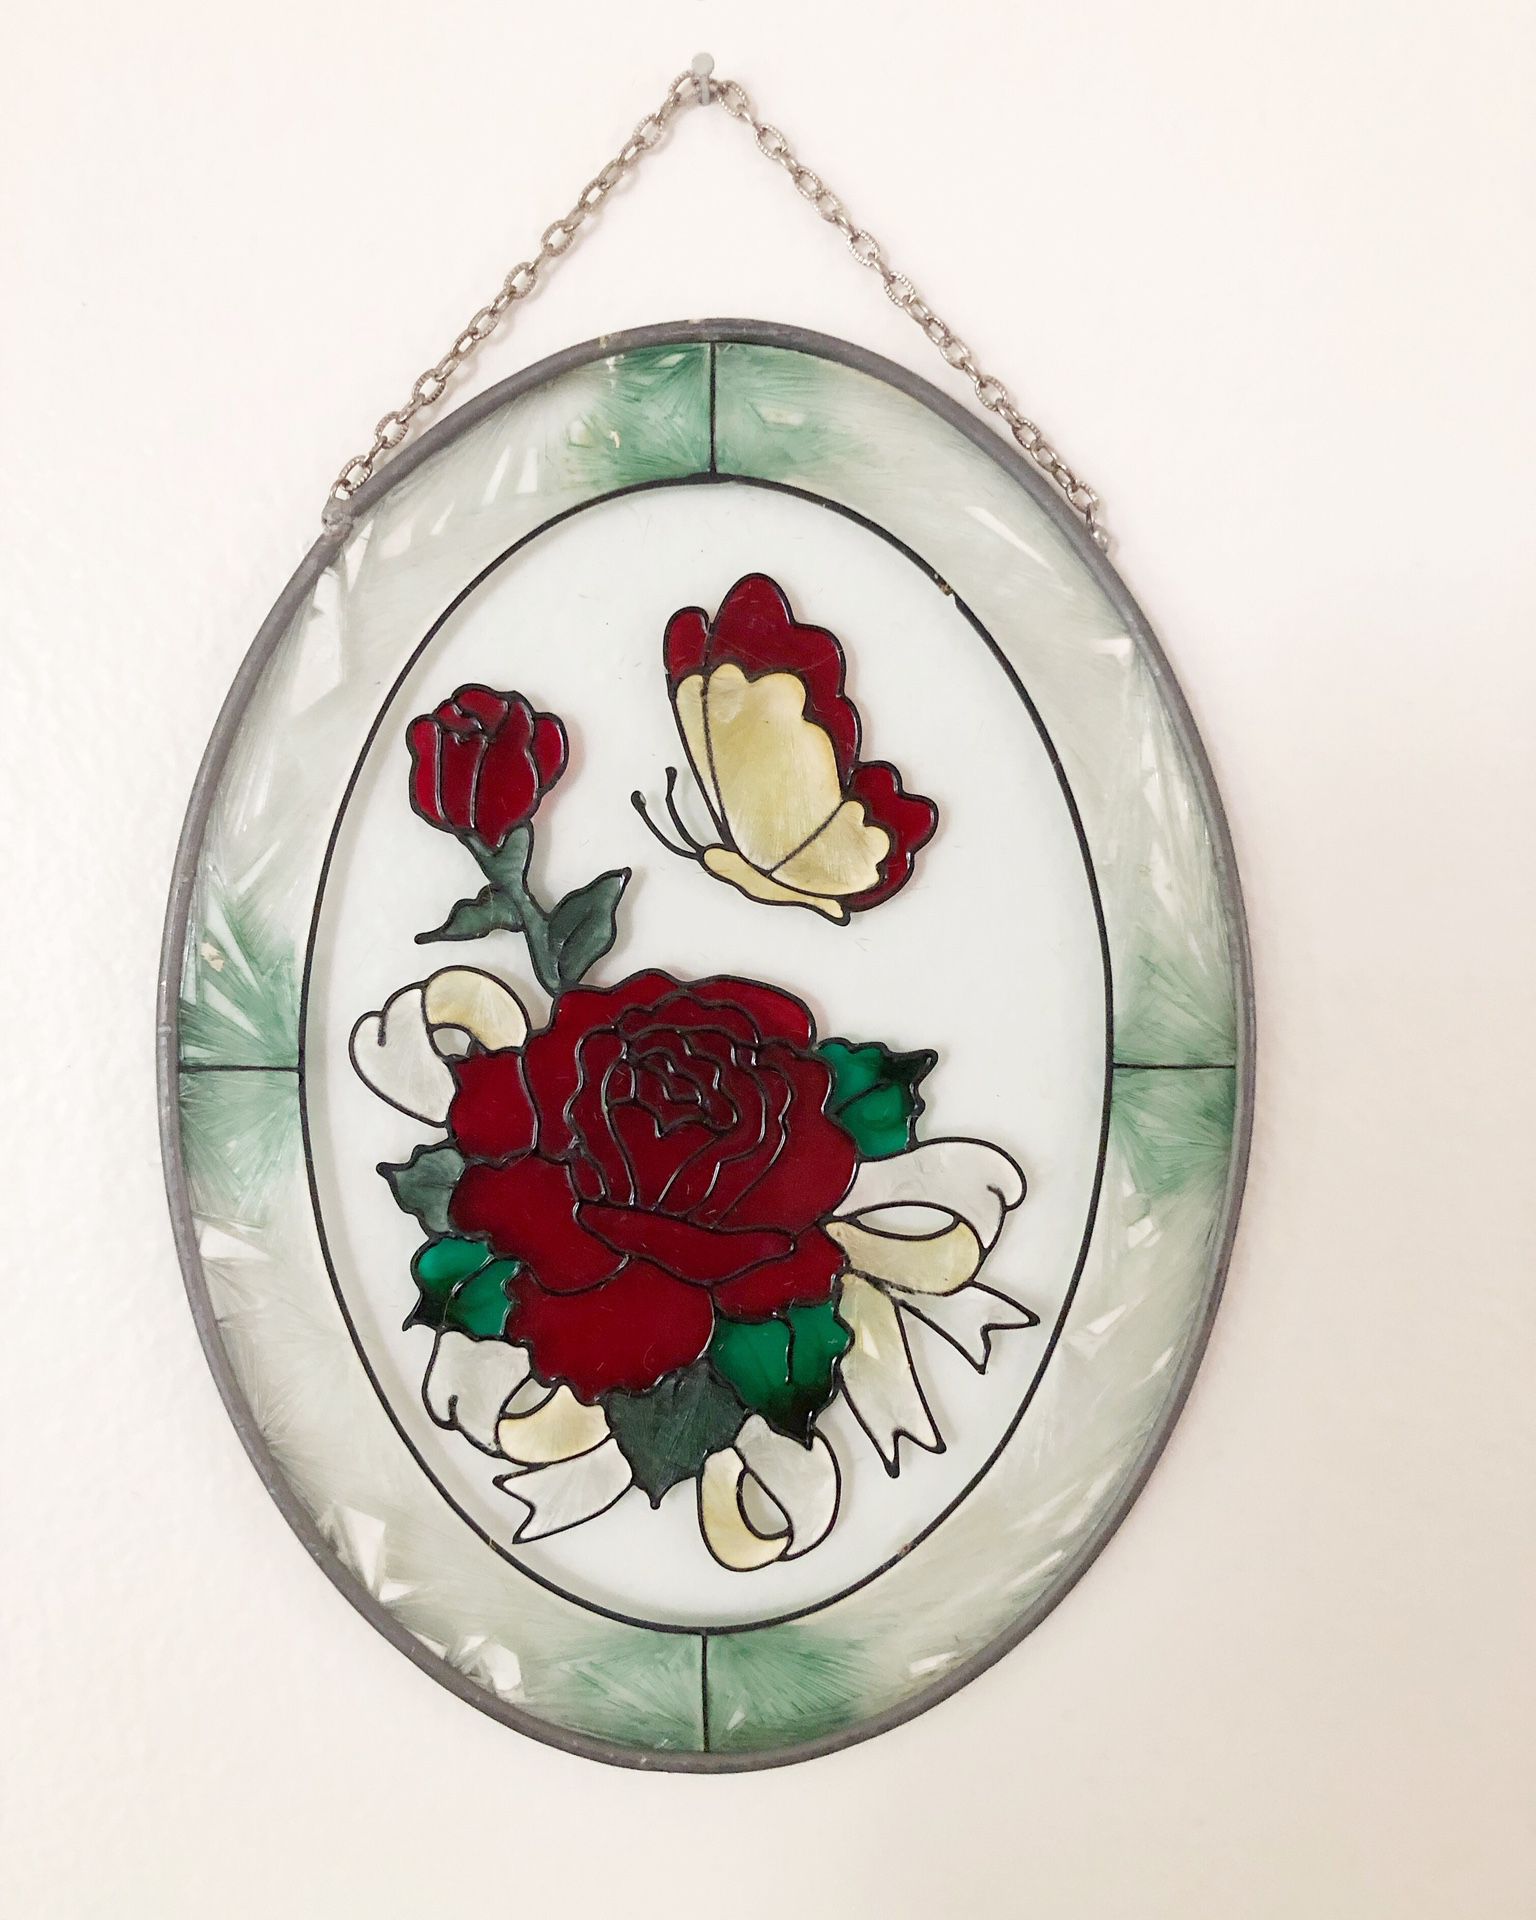 Vintage oval stained glass hanging with red roses and butterfly